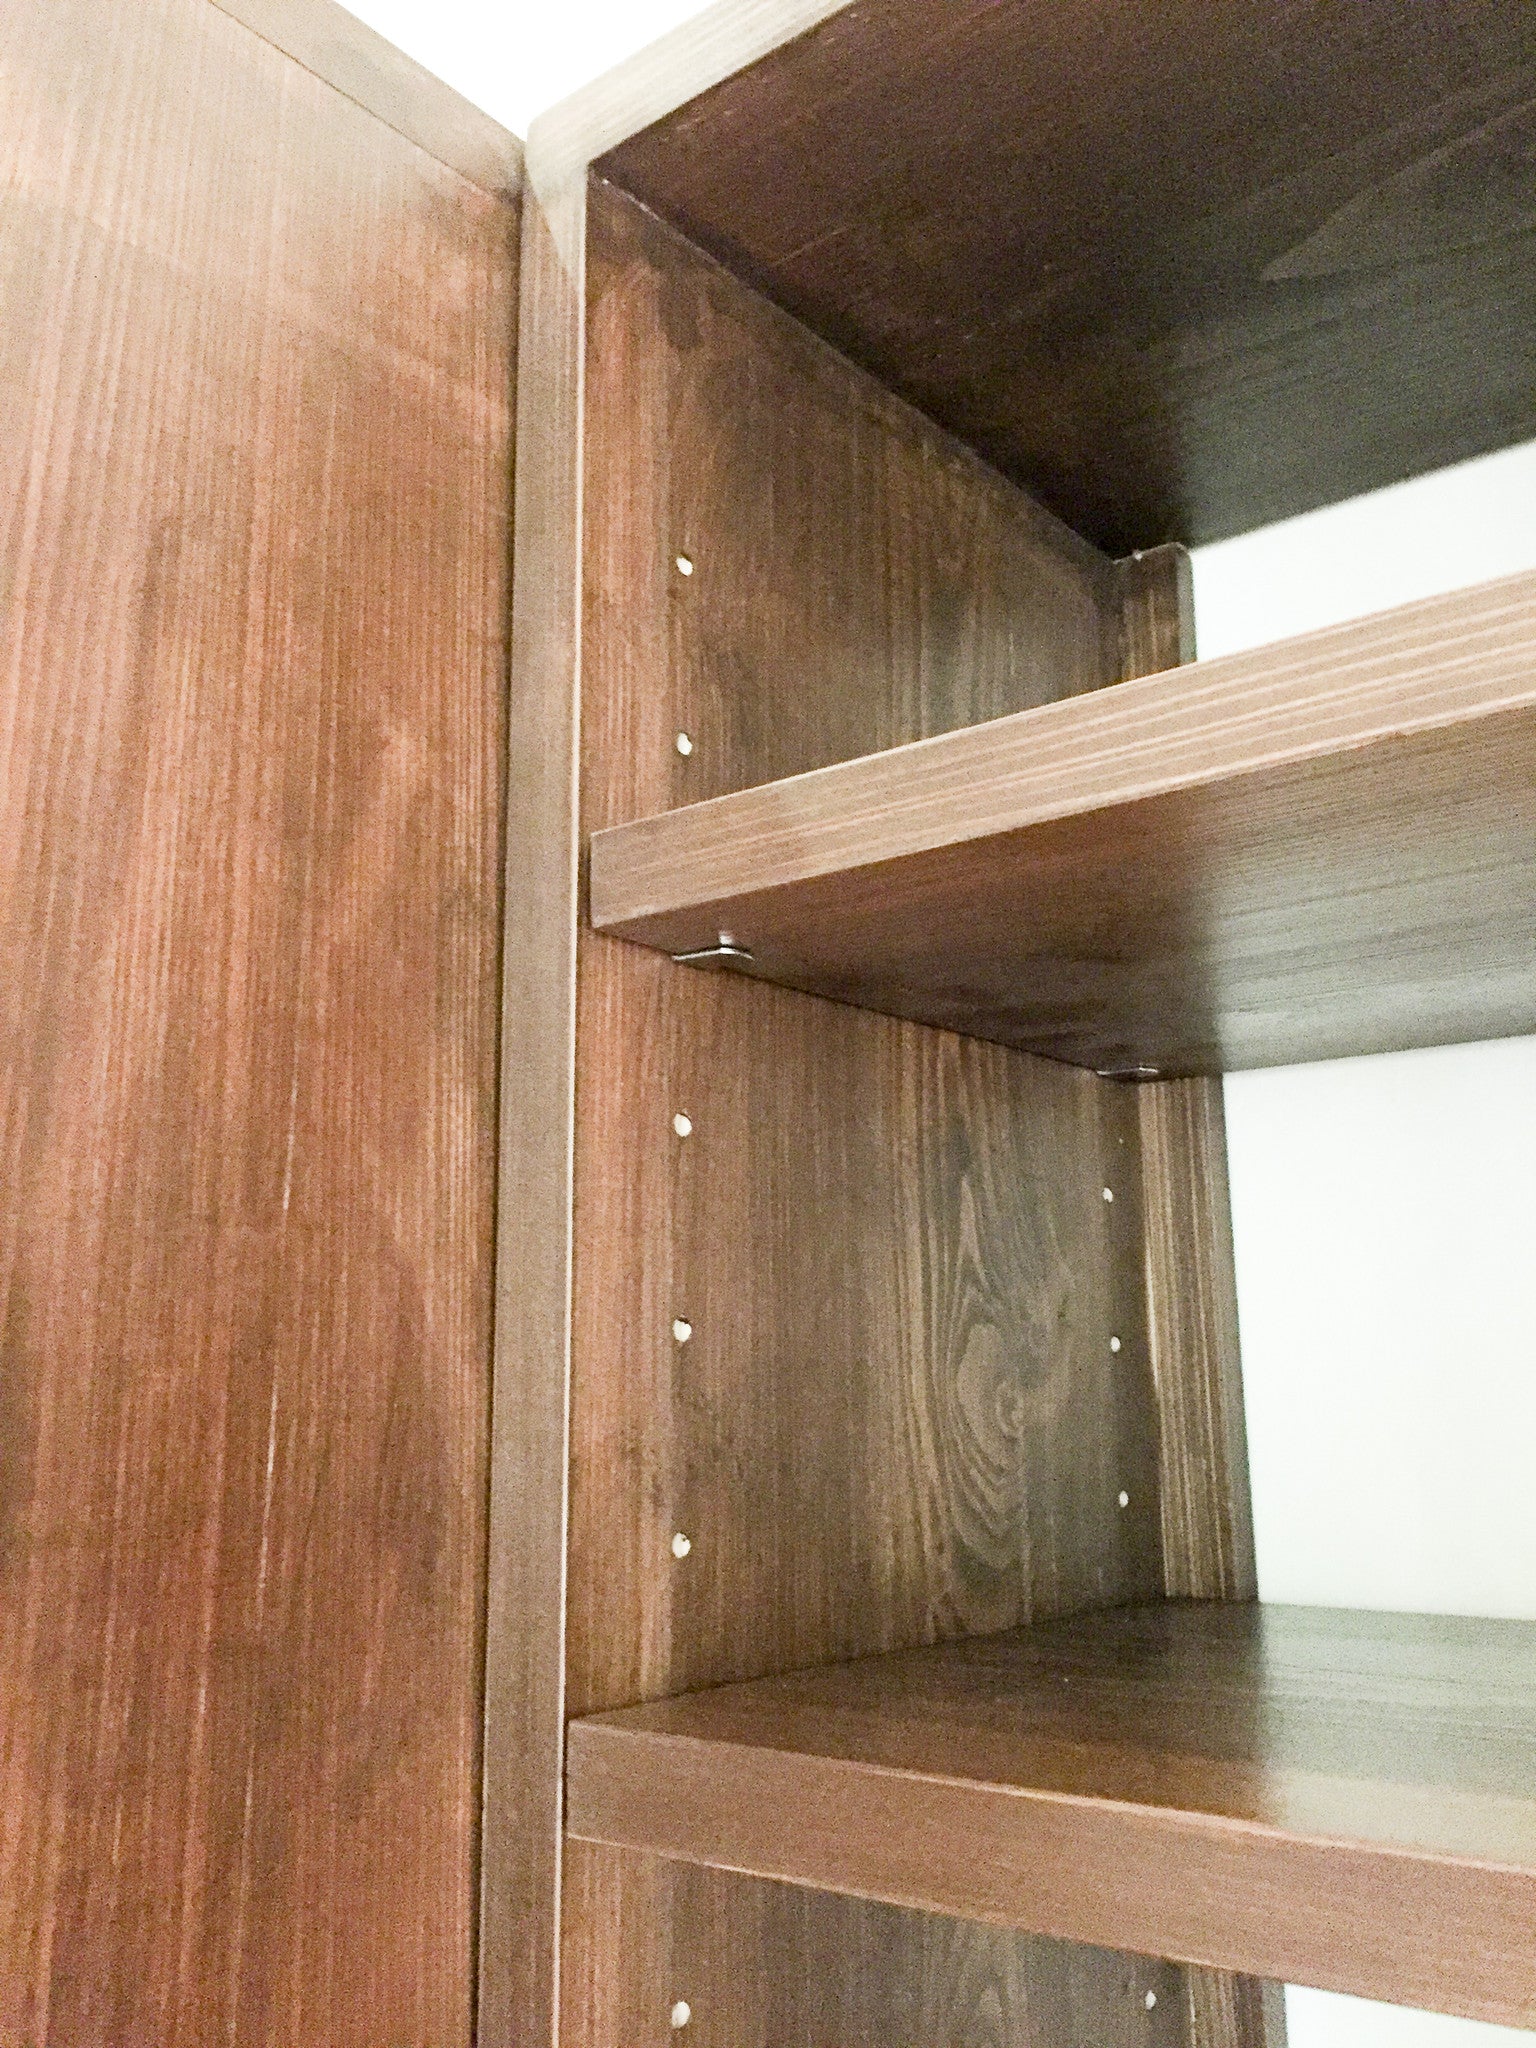 The Built-In Closet (modified to your specifications)